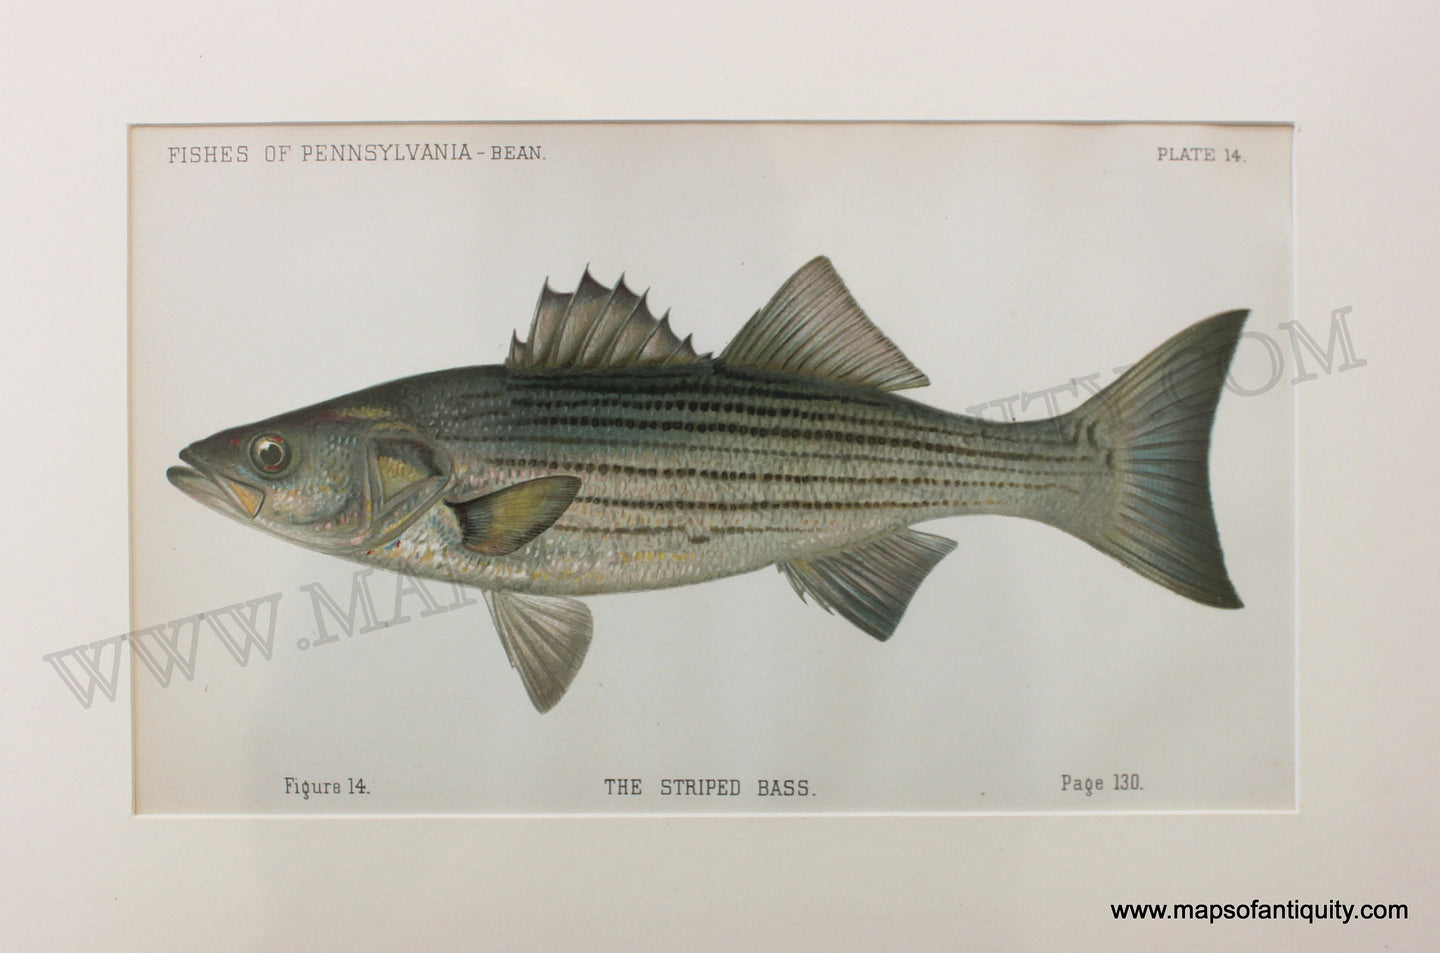 Antique-Print-The-Striped-Bass-1892-Bean-State-of-Pennsylvania-Fish-1800s-19th-century-Maps-of-Antiquity